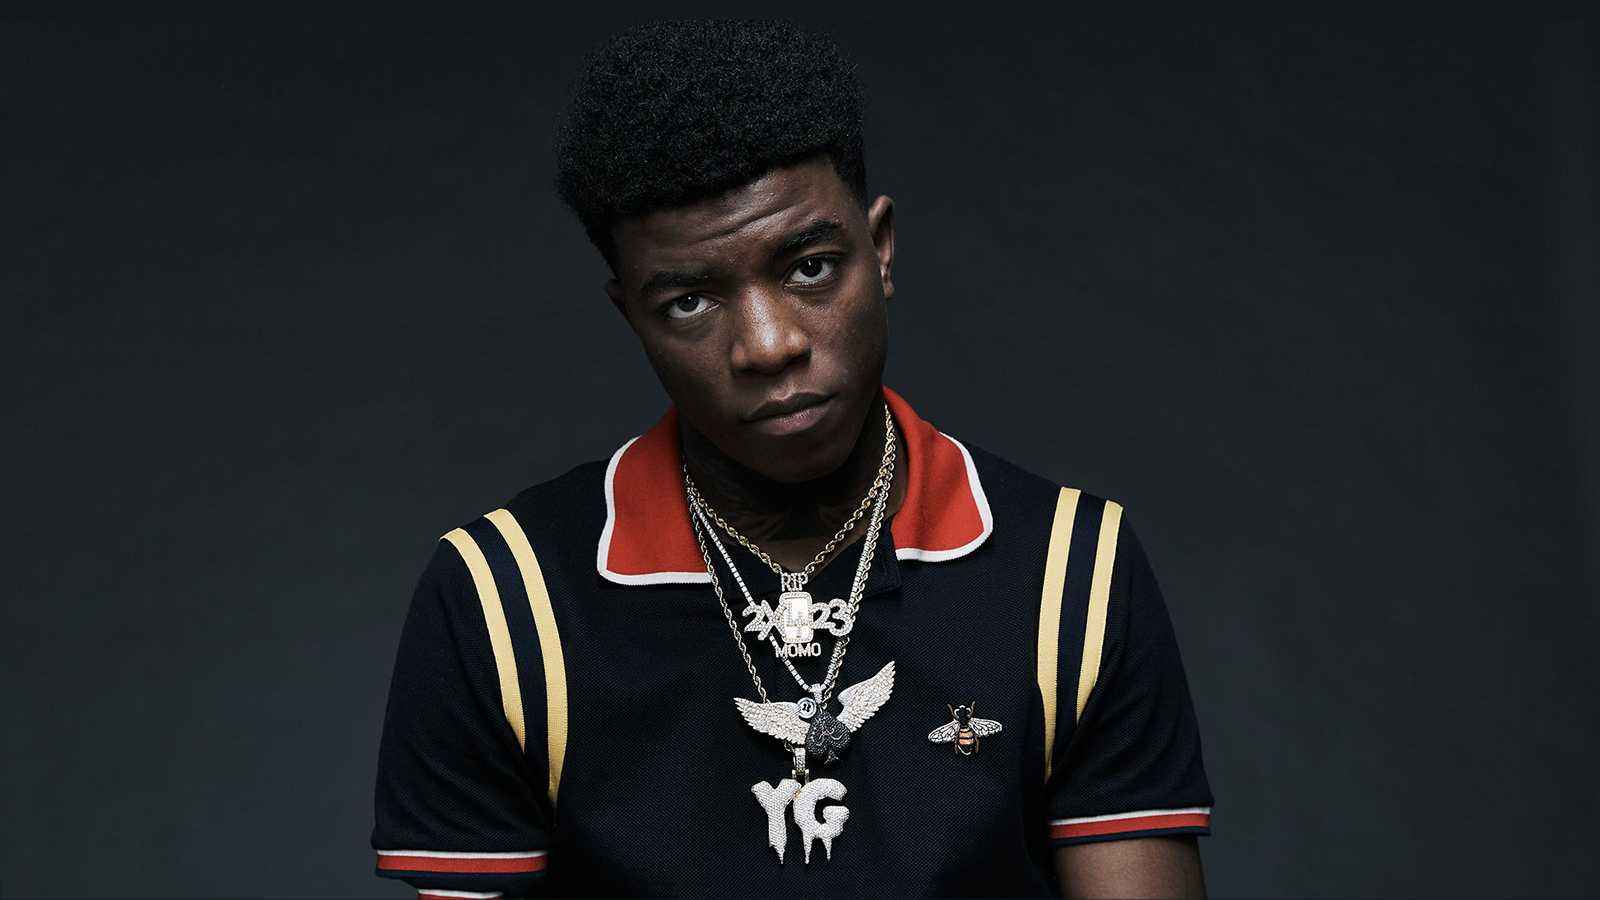 Yungeen Ace Biography: Age, Height, Birthday, Family, Net Worth